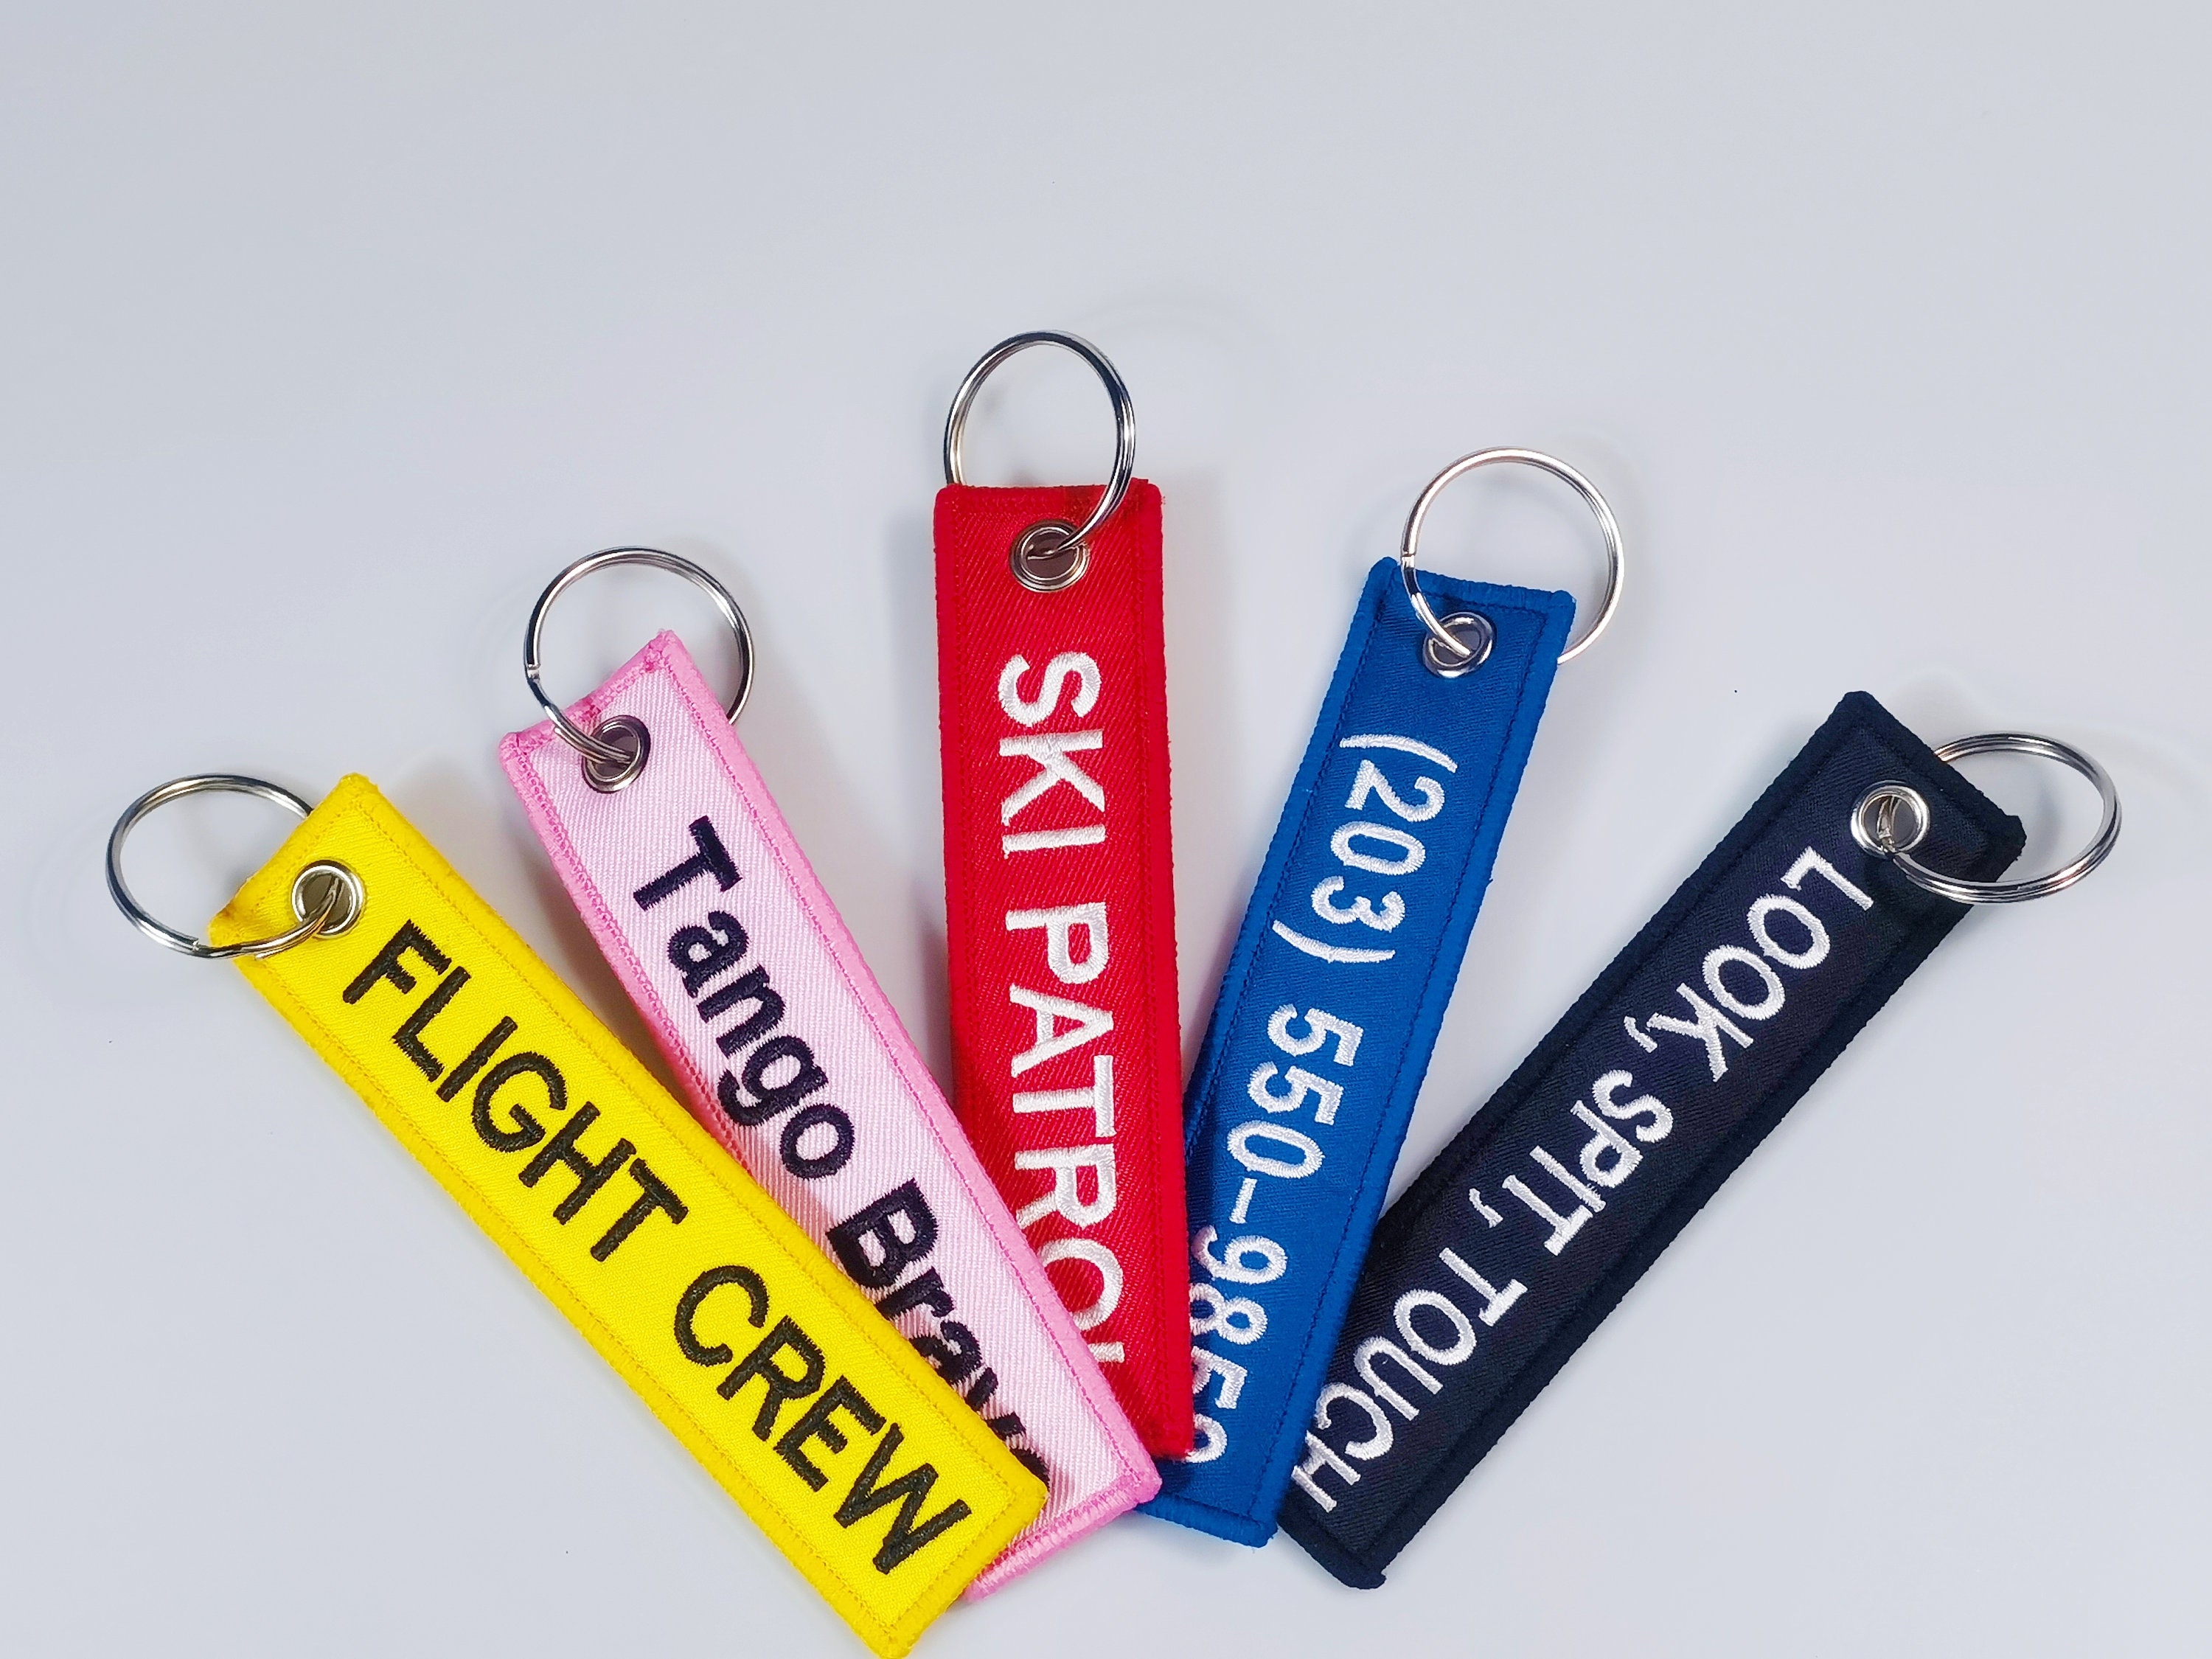 Tapout Tuning Flight Tag Keychain